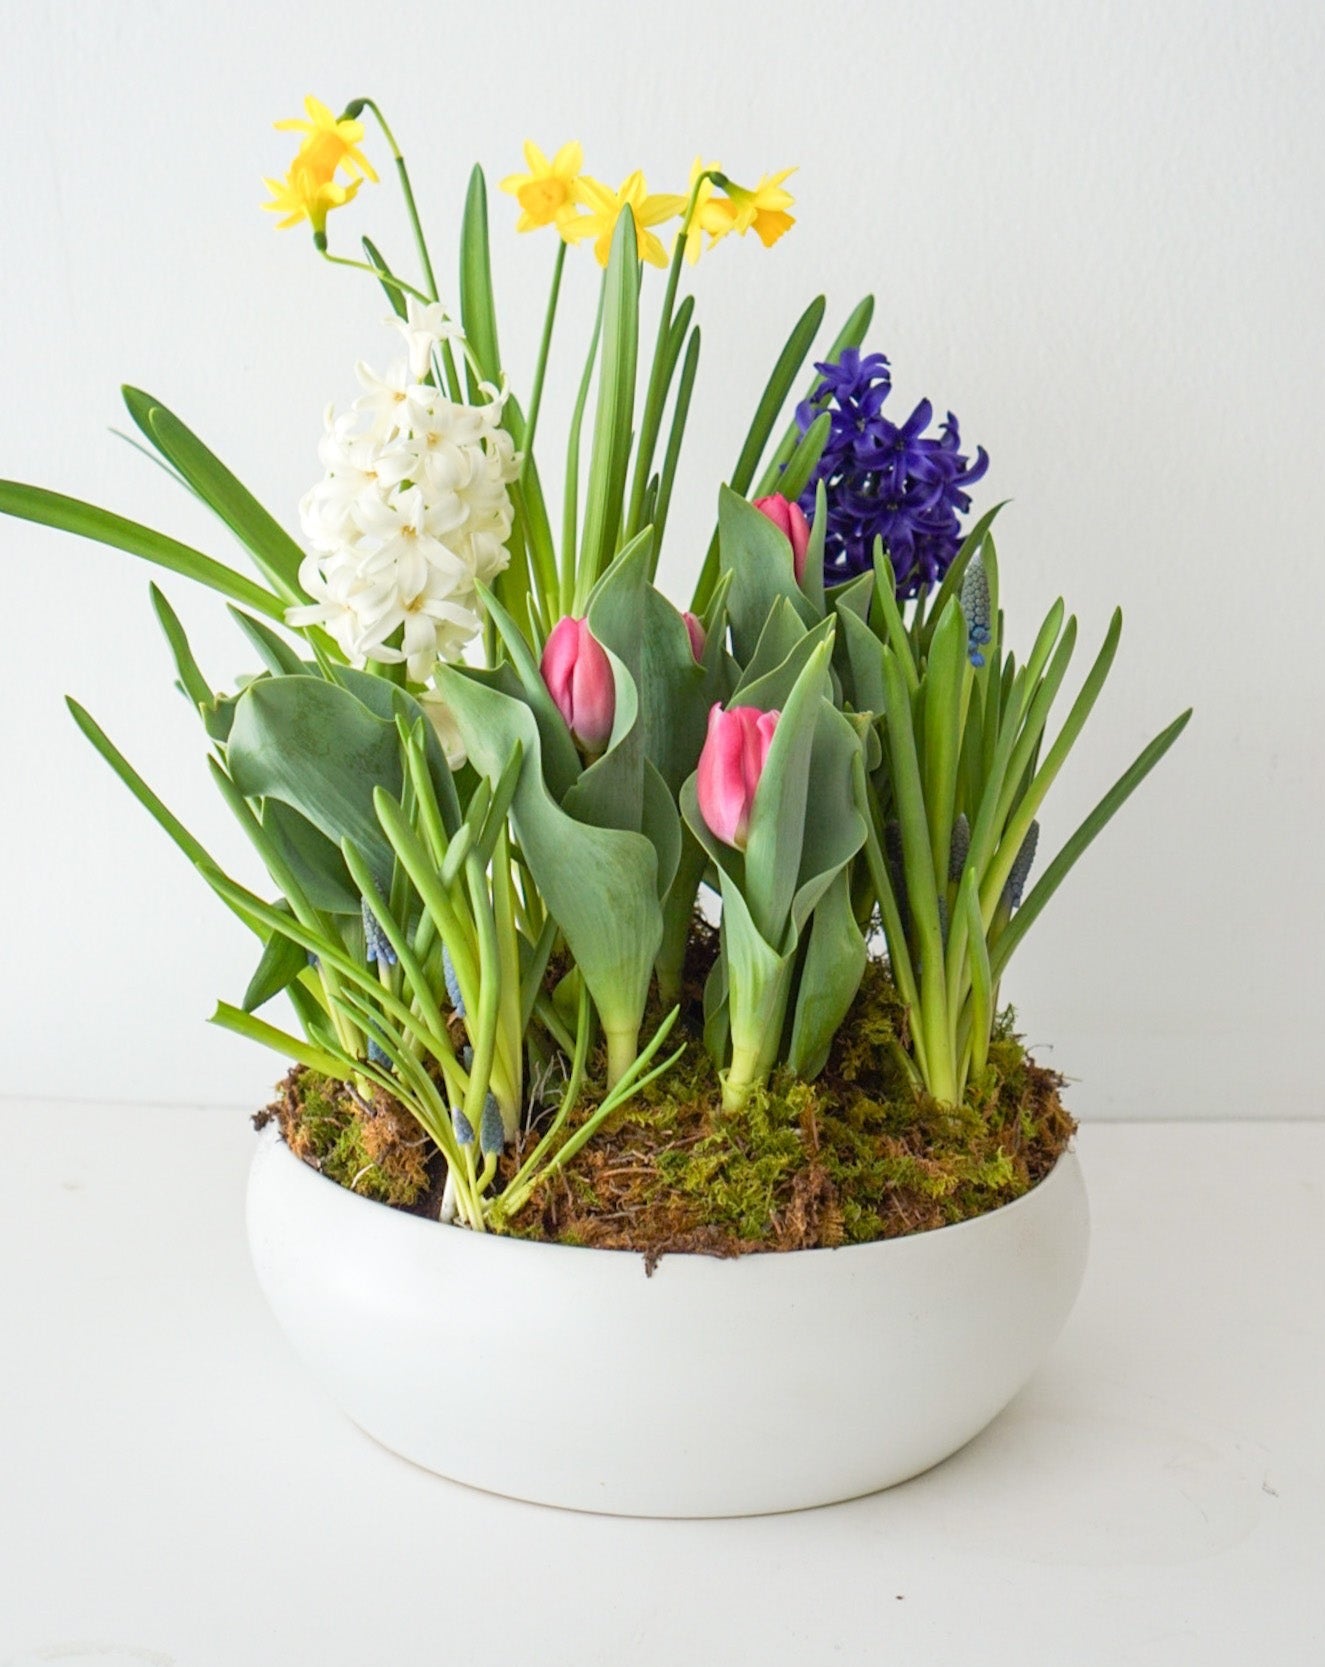 All spring bulbs in one planter - Tulips, Hyacinth, Daffodil, Muscari, arranged in a shallow white ceramic bowl. These fun potted bulbs is a wonderful way to cheer up someone you love or brighten your own entryway. Also, a great housewarming gift!